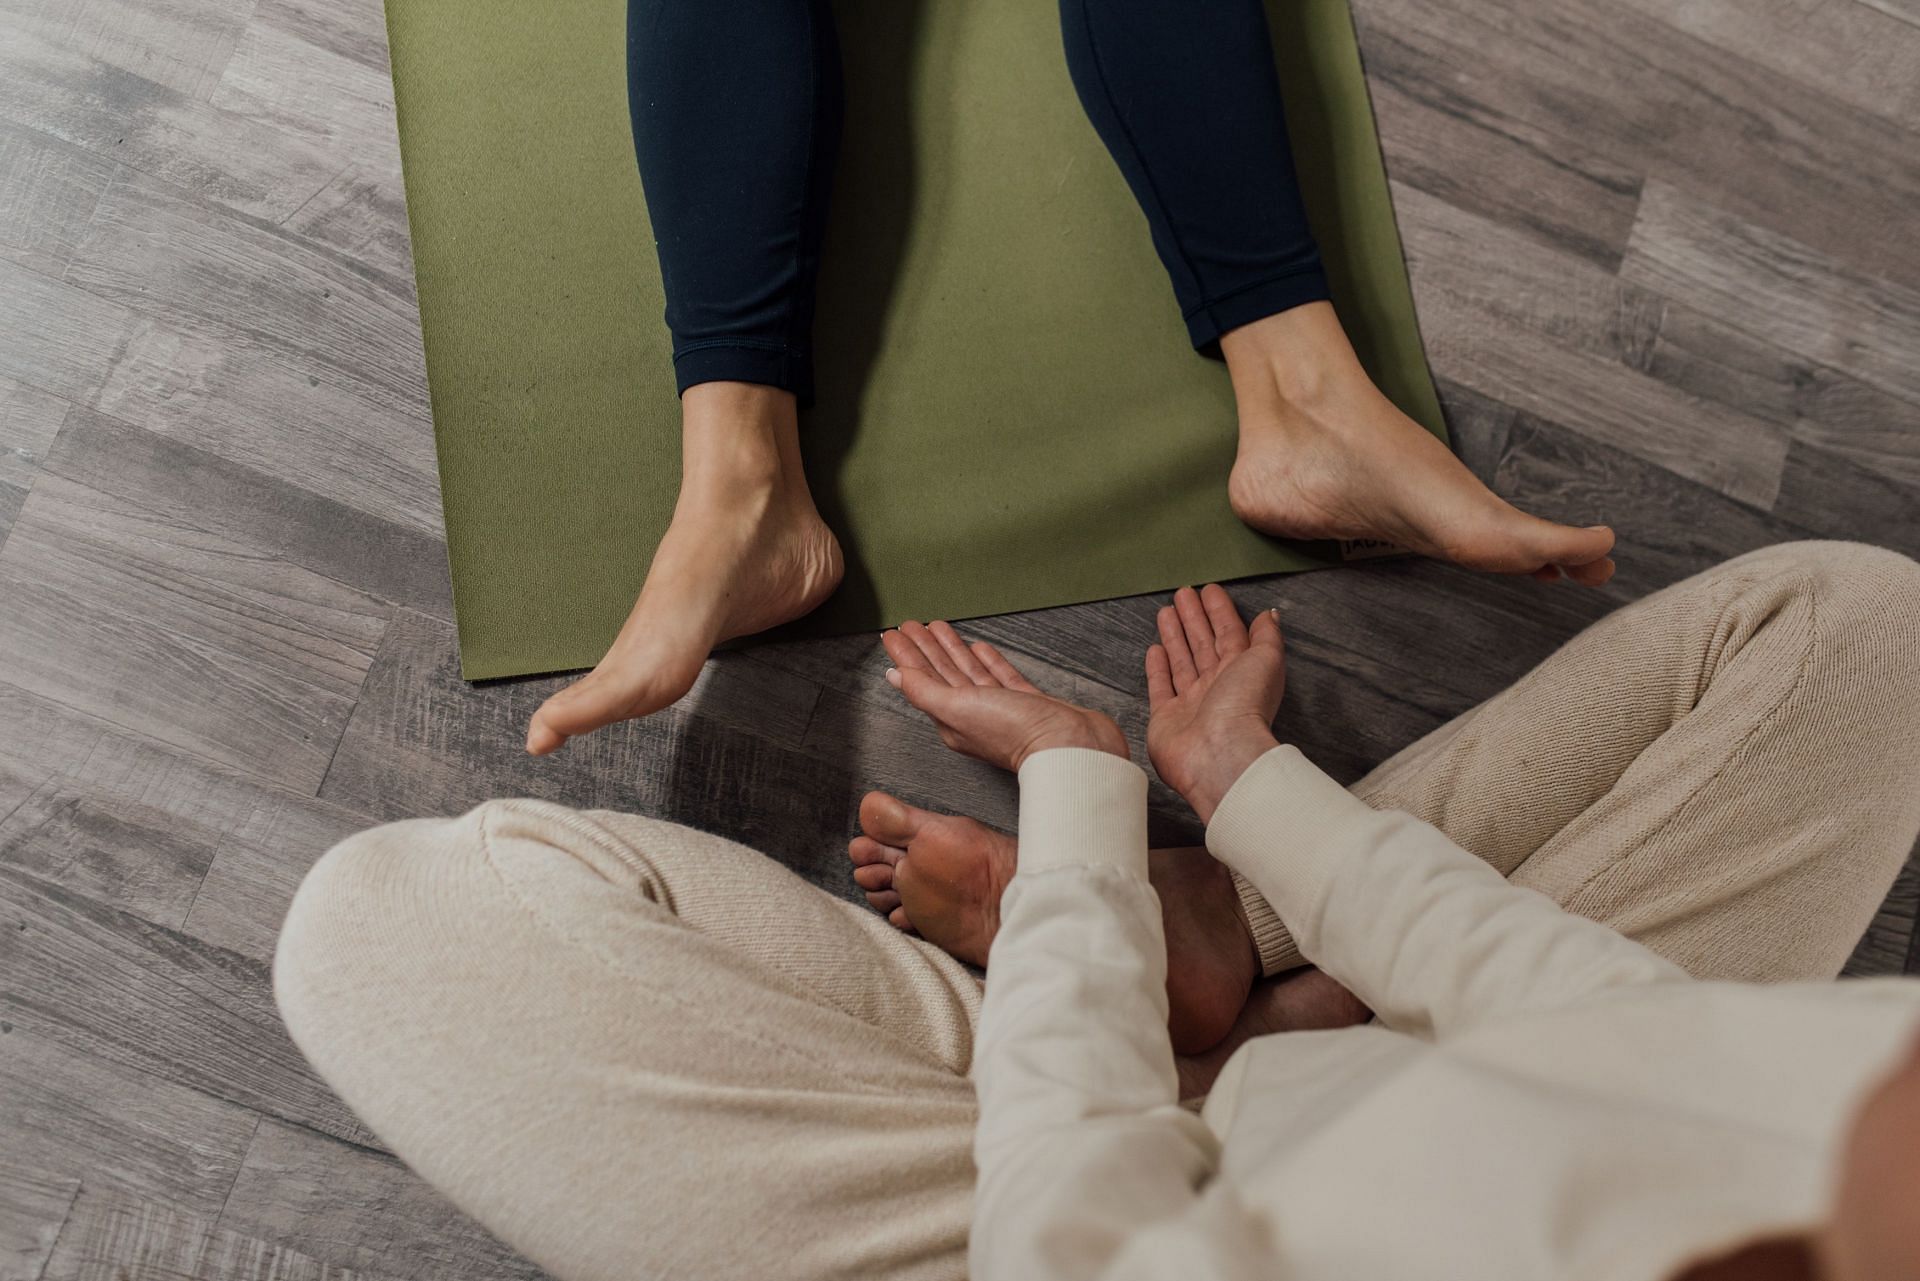 The fundamental tenet of reiki therapy is that someone who has little energy is more likely to be ill or worried. (Image via Pexels/ Arina Krasnikova)